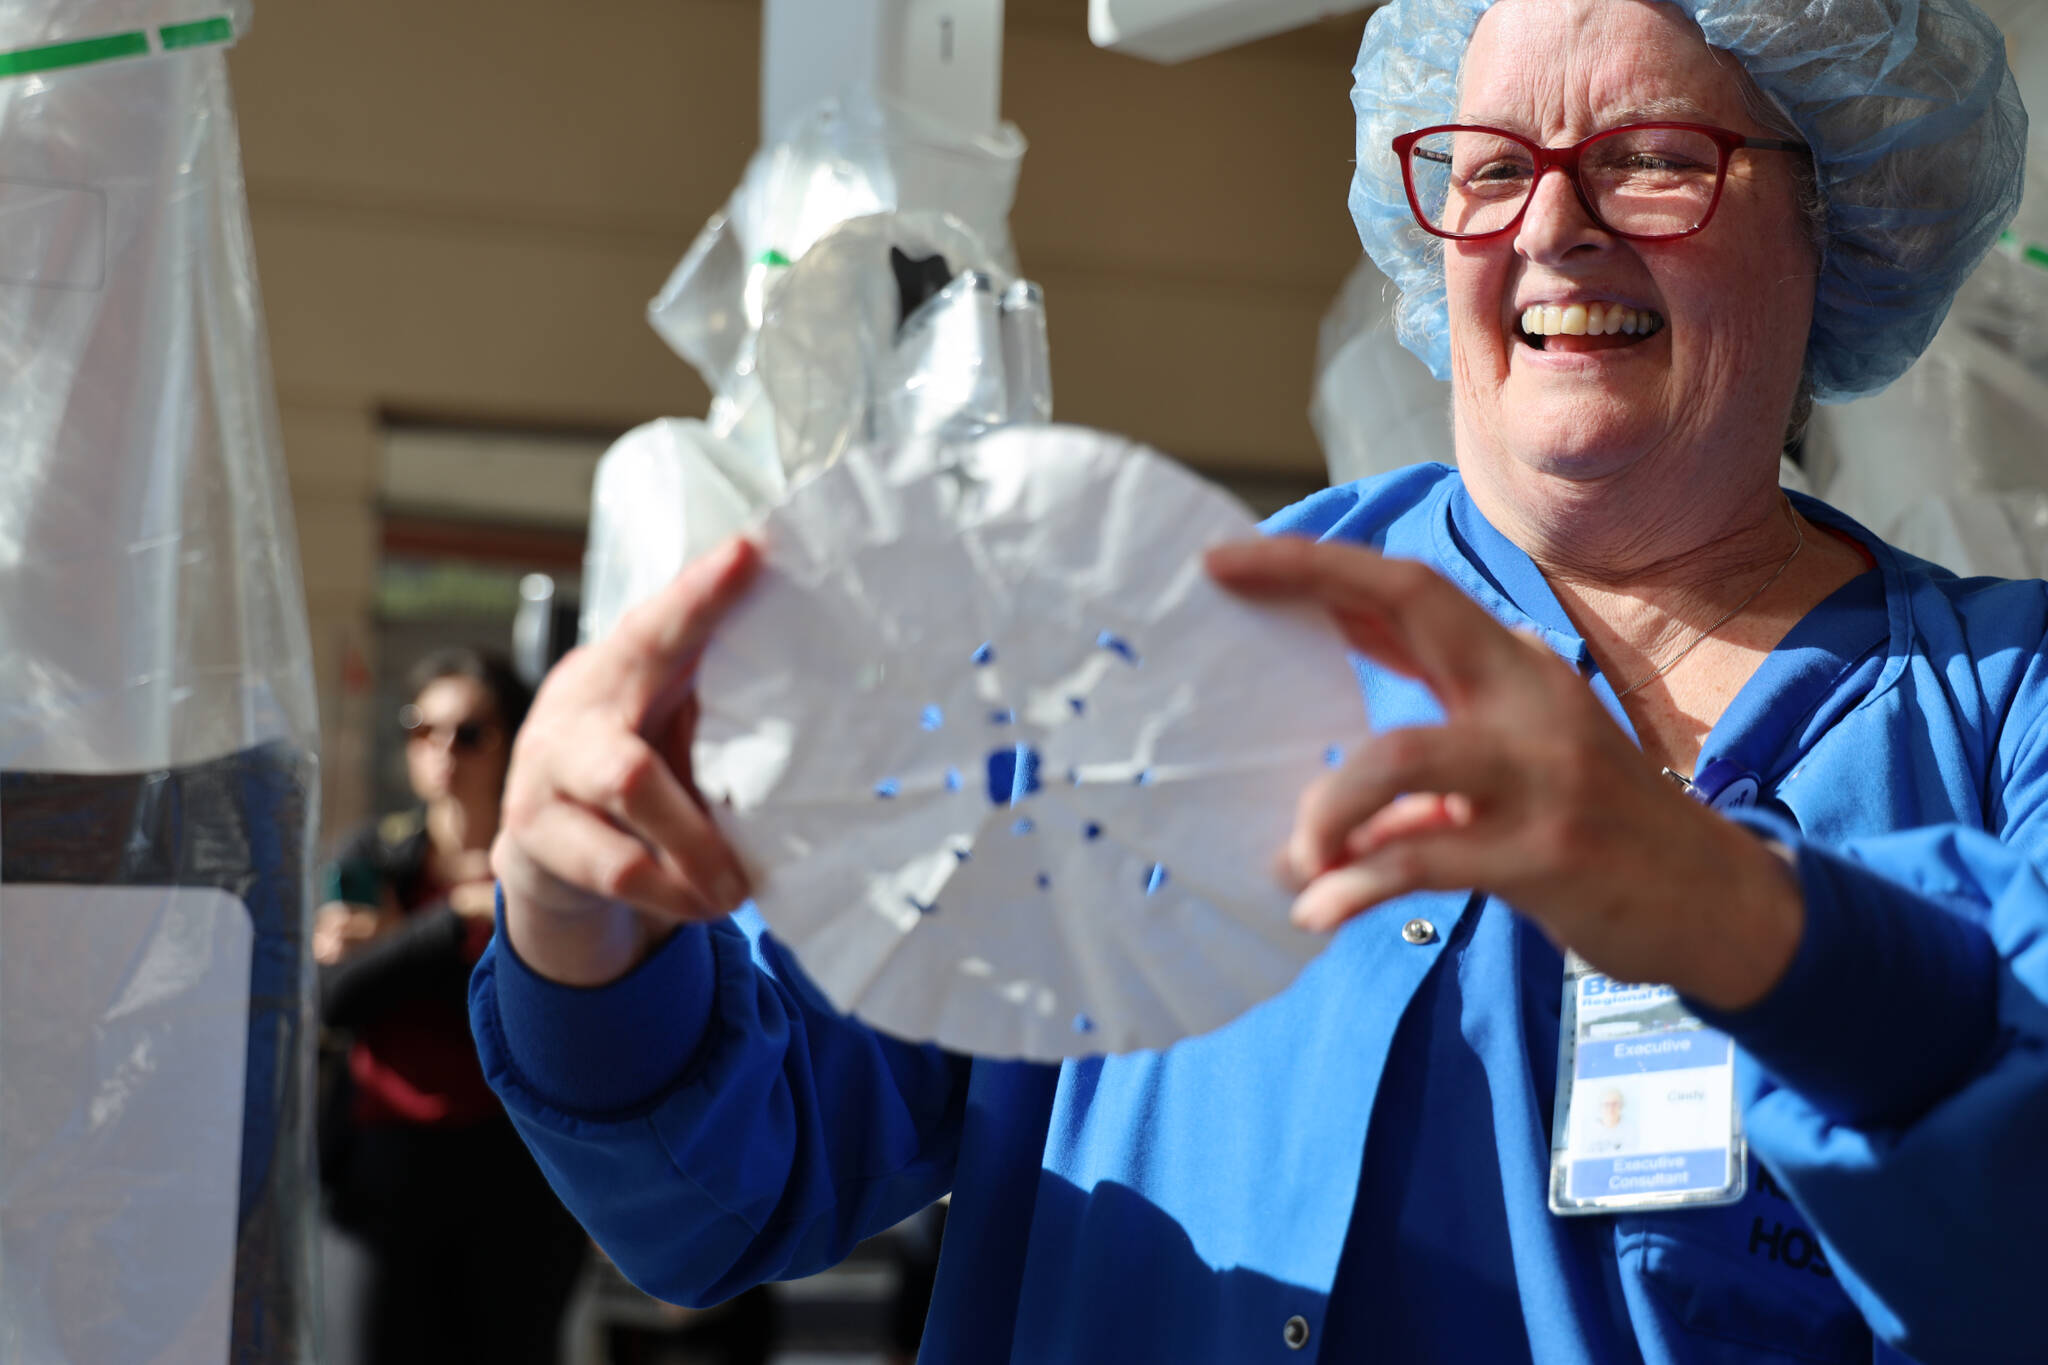 Cindy Spica, a private robotic consultant who traveled to Juneau to assist Bartlett Regional Hospital in preparing to use the new machine, smiles at a snowflake made by Thunder Mountain High School junior and exchange student from Brazil, Ana Scopel, using the Da Vinci Xi Robotic Surgery System. (Clarise Larson / Juneau Empire)